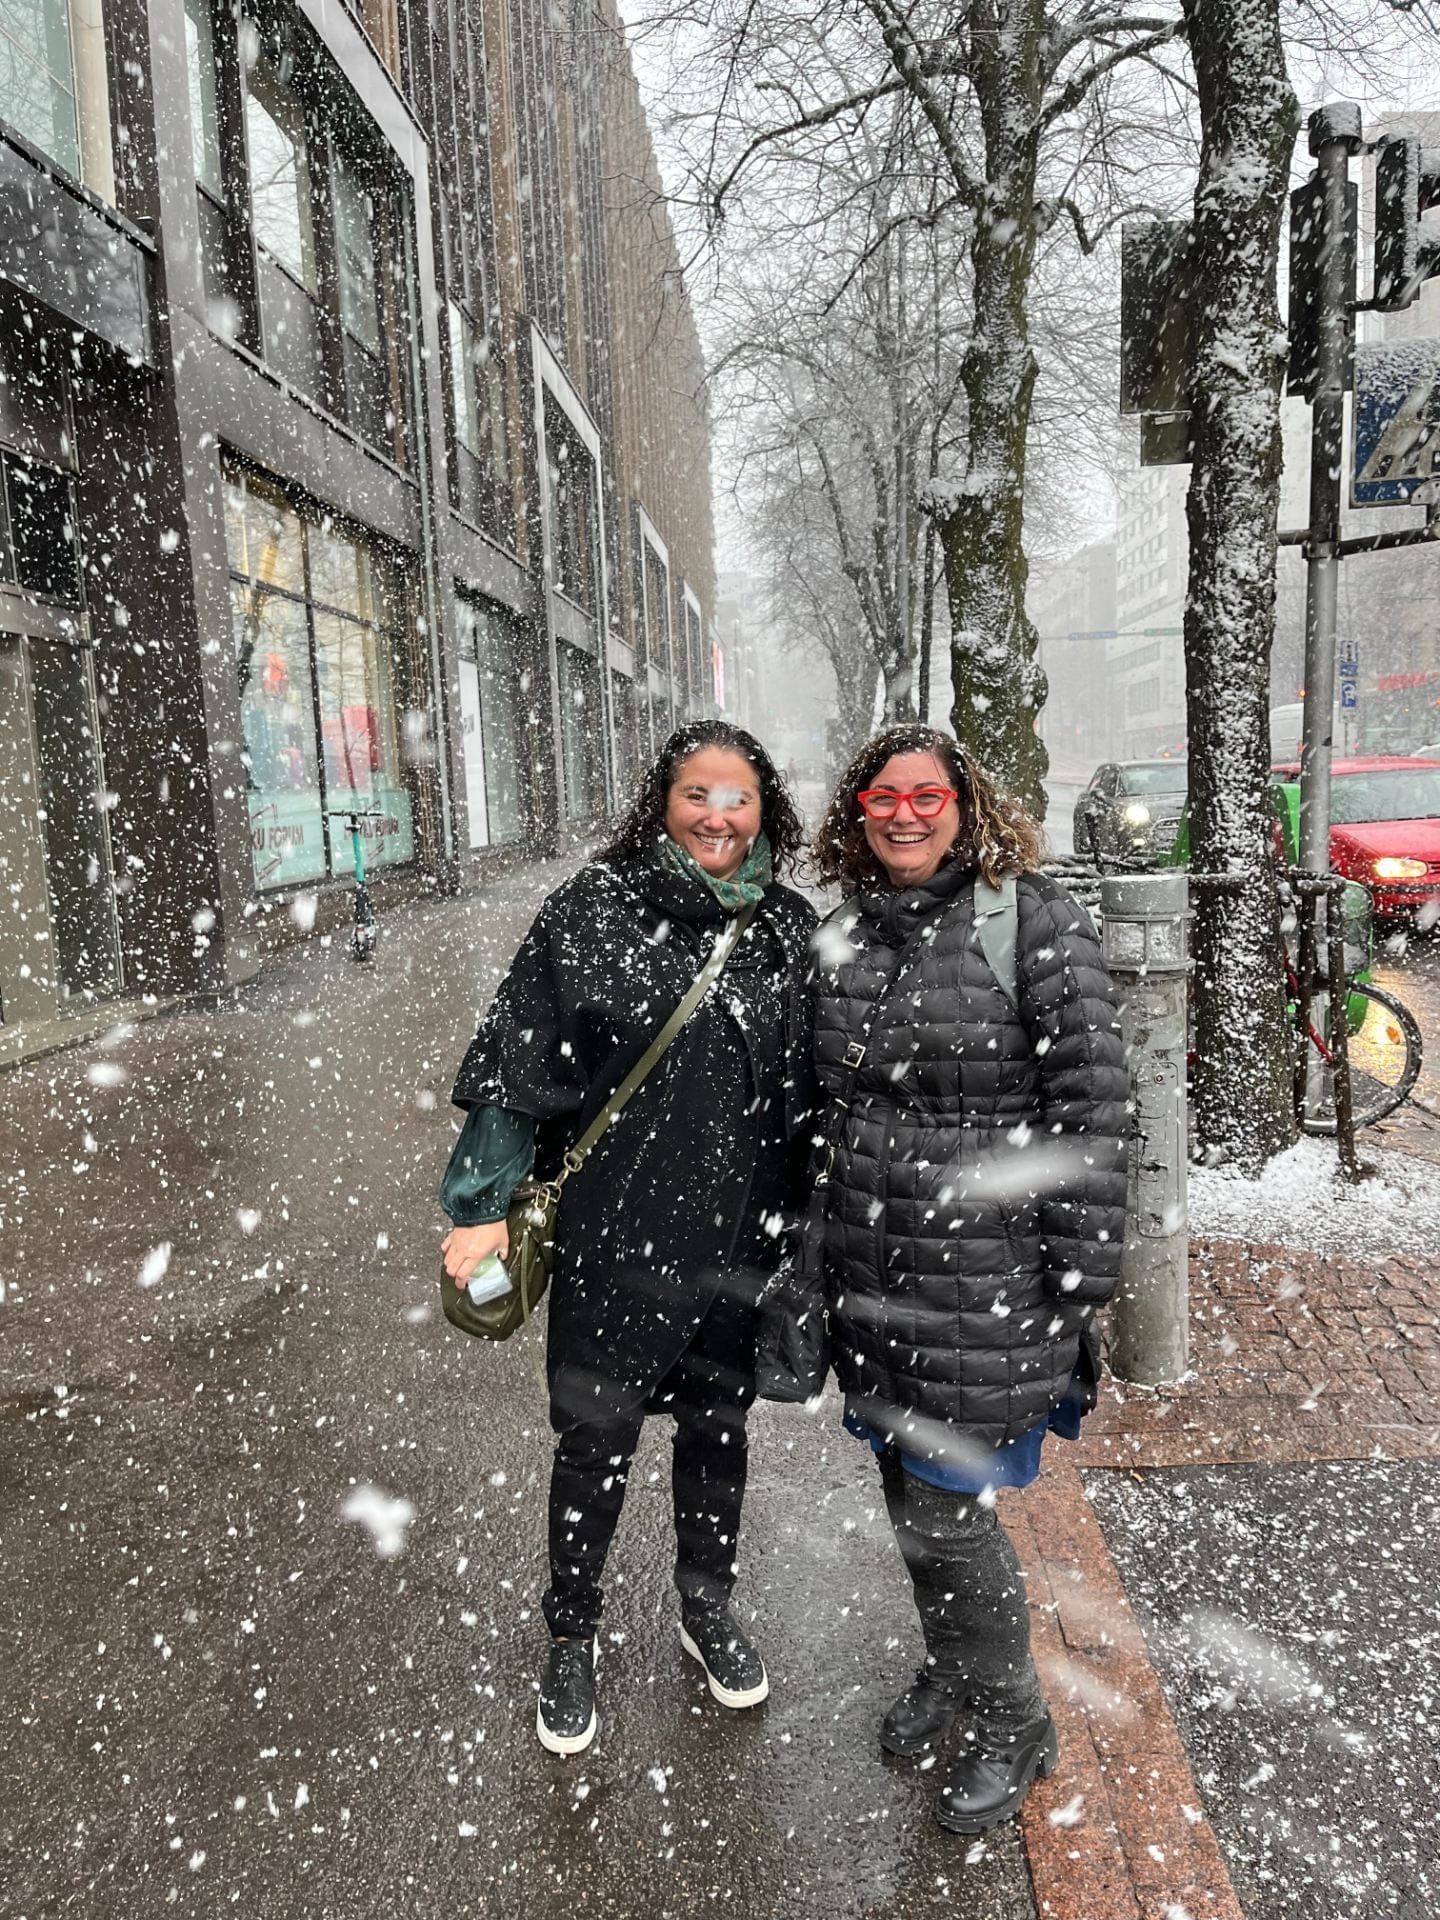 Two women in large black jackets smiling at the camera as snow falls on a sidewalk